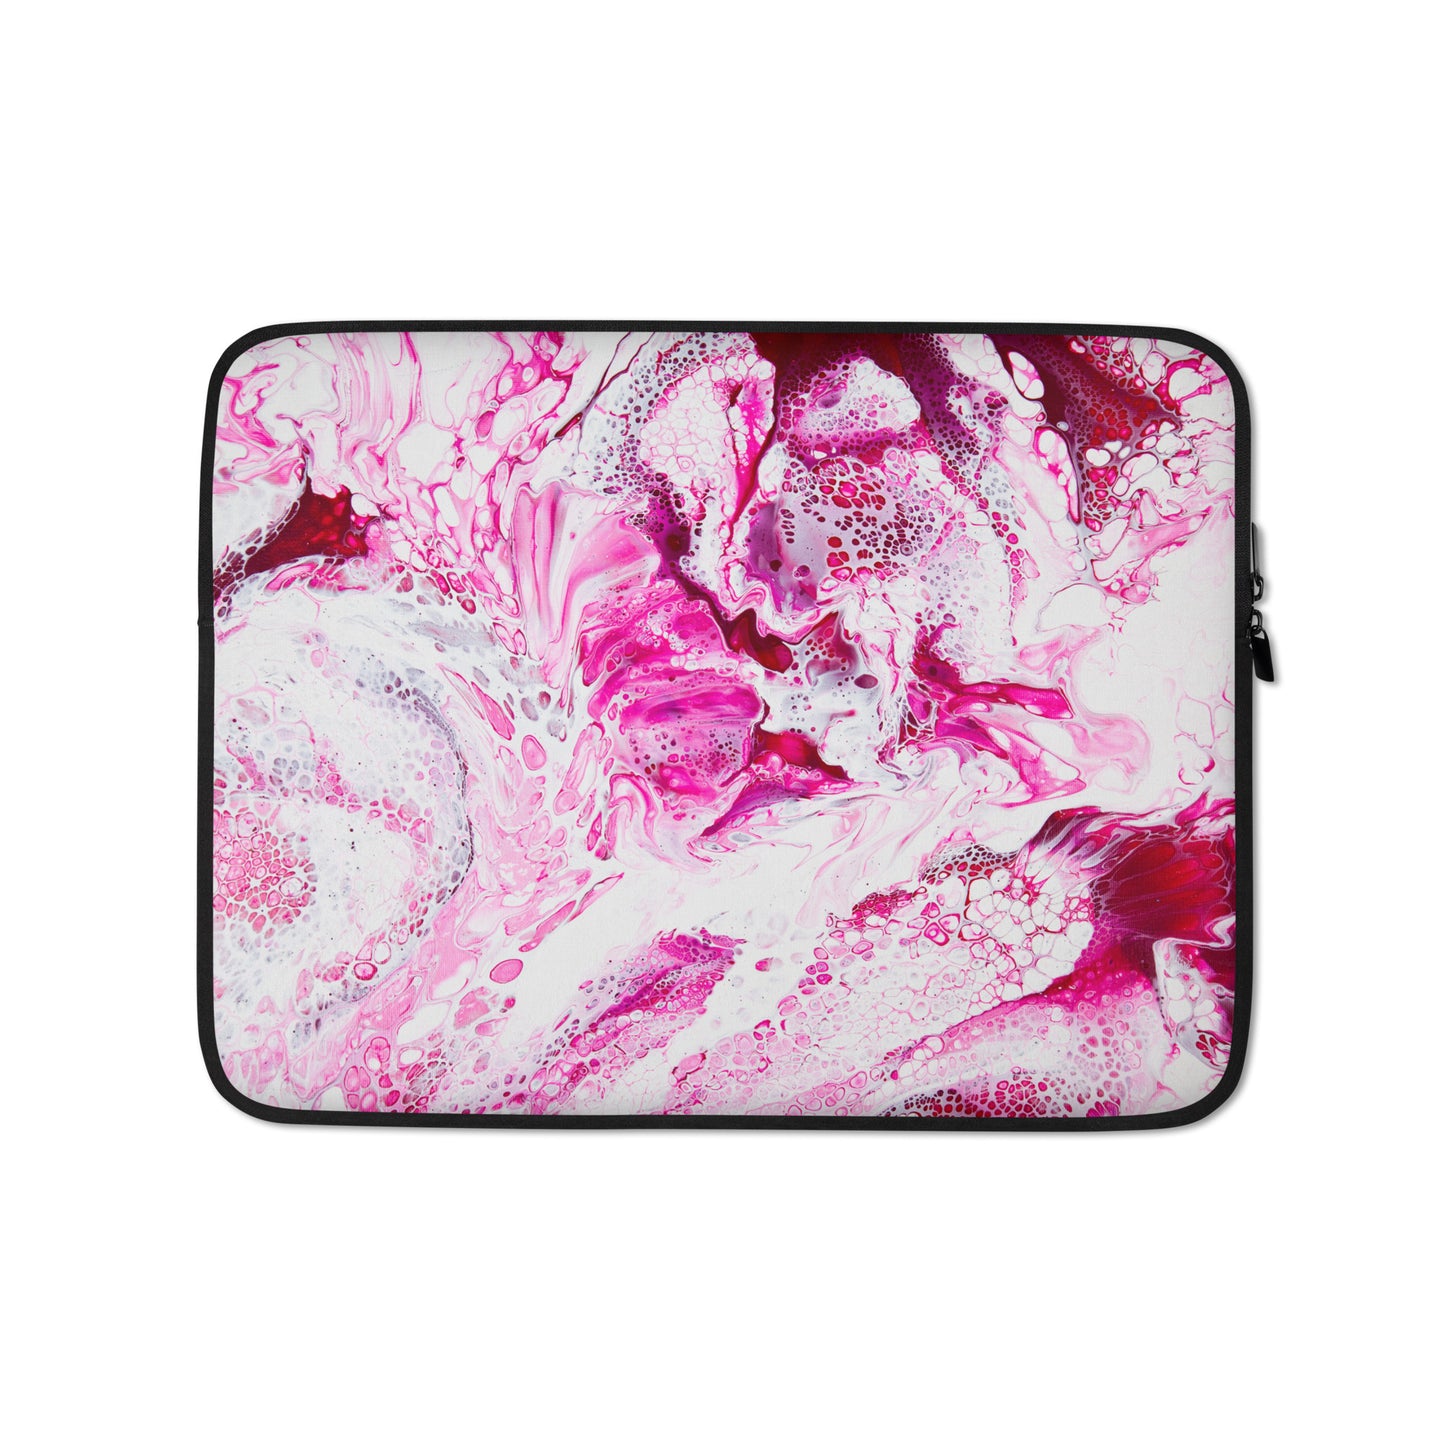 NightOwl Studio Padded Laptop Sleeve with Faux Fur Lining, 13 and 15 Inch Covers for Portable Computers and Large Tablets, Slim and Portable Neoprene for Work, Travel, or Gaming, Pink Distortion